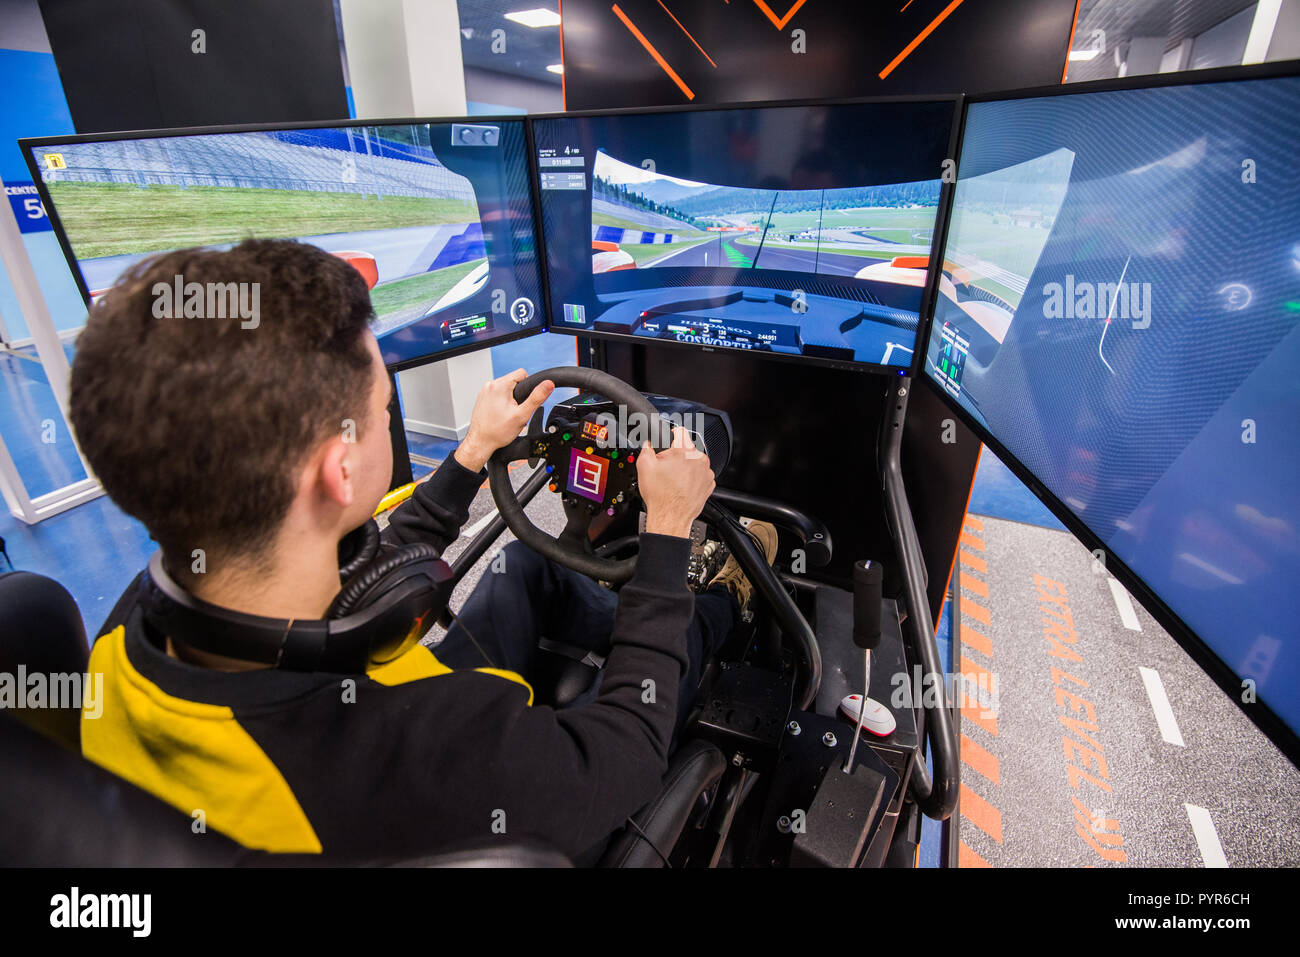 MOSCOW, RUSSIA - OCTOBER 27 2018. Simulation of race car video player game with big screen monitors and cockpit controls like a racing car. Stock Photo